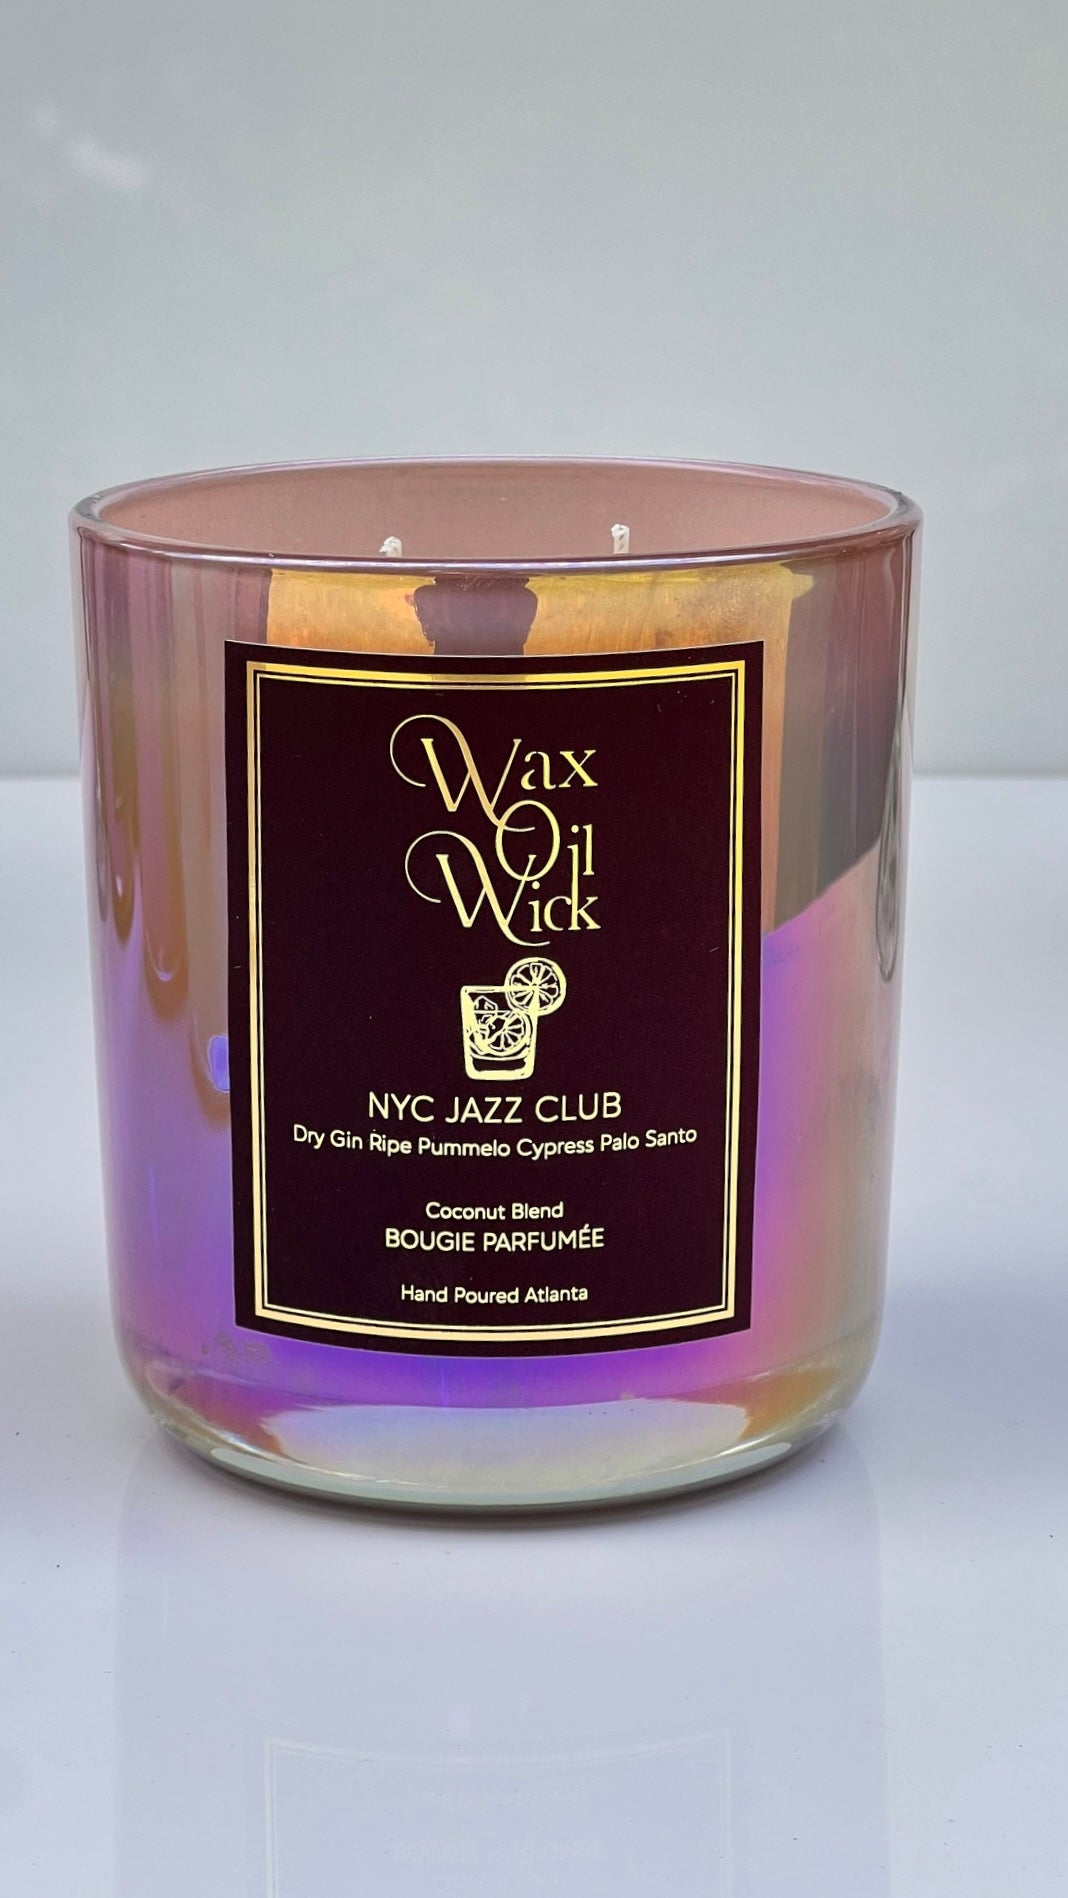 NYC Jazz Club Inspired Citrus/Woodsy Scented Candle